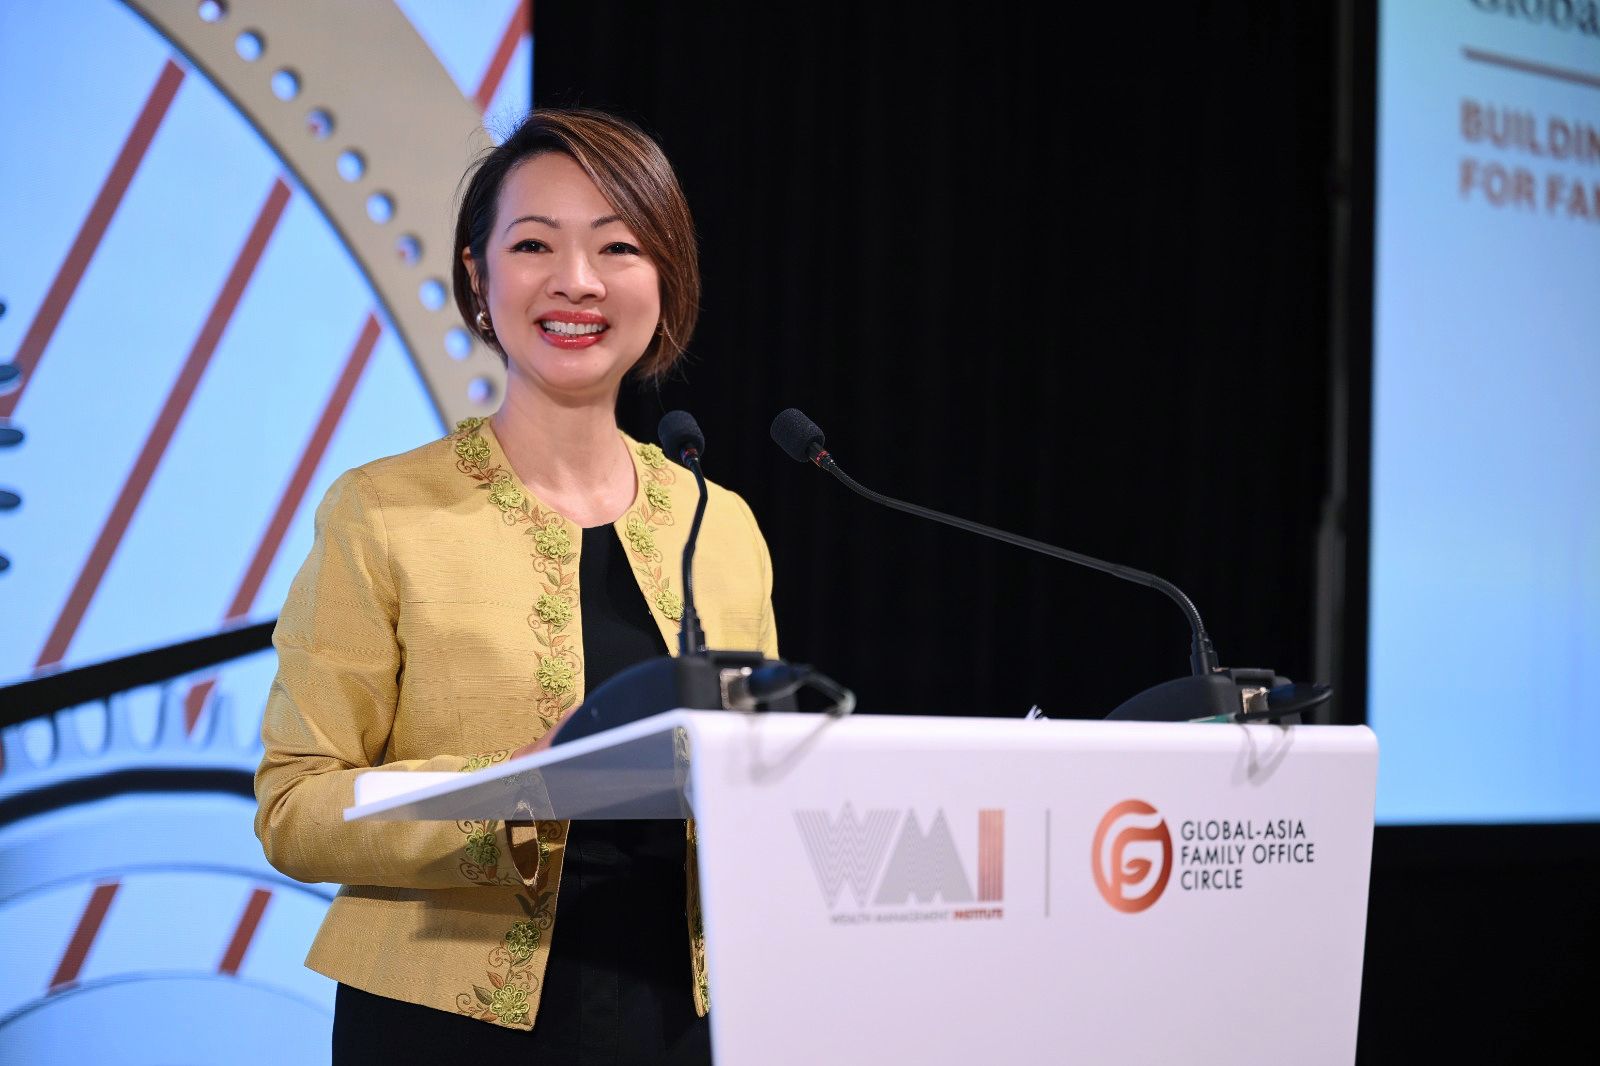 WMI Announces Measures to Deepen Engagement of Family Offices in Singapore, Building on Doubling Demand for WMI’s Family Office Programmes and Forums to Over 3,000 in Past Year